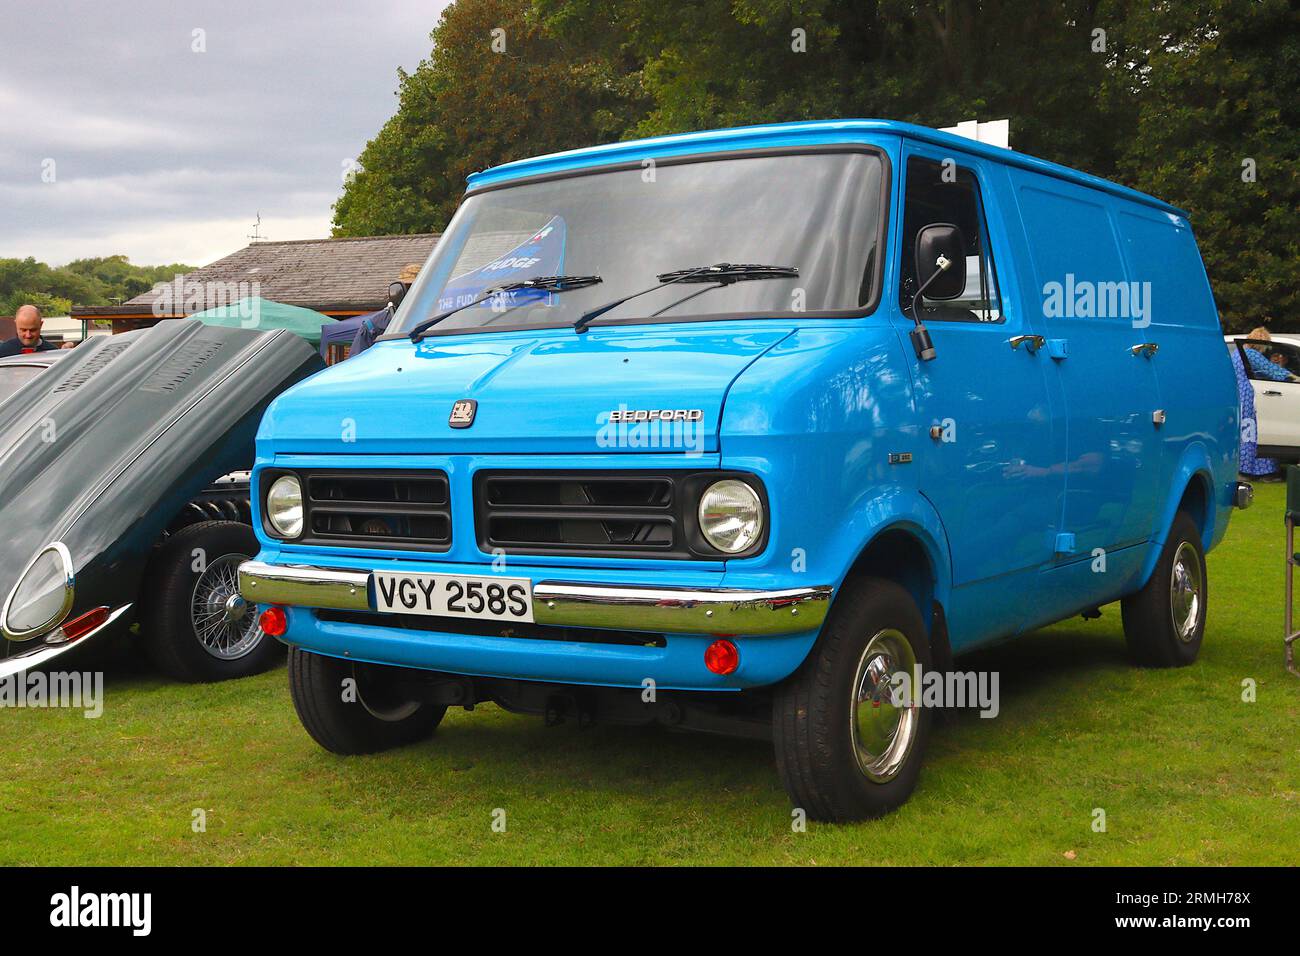 Pristine 1977 Bedford CF250 Mk1 van restored using many NOS parts - Vauxhall’s answer to the dominant Ford Transit in the light commercial van sector. Stock Photo